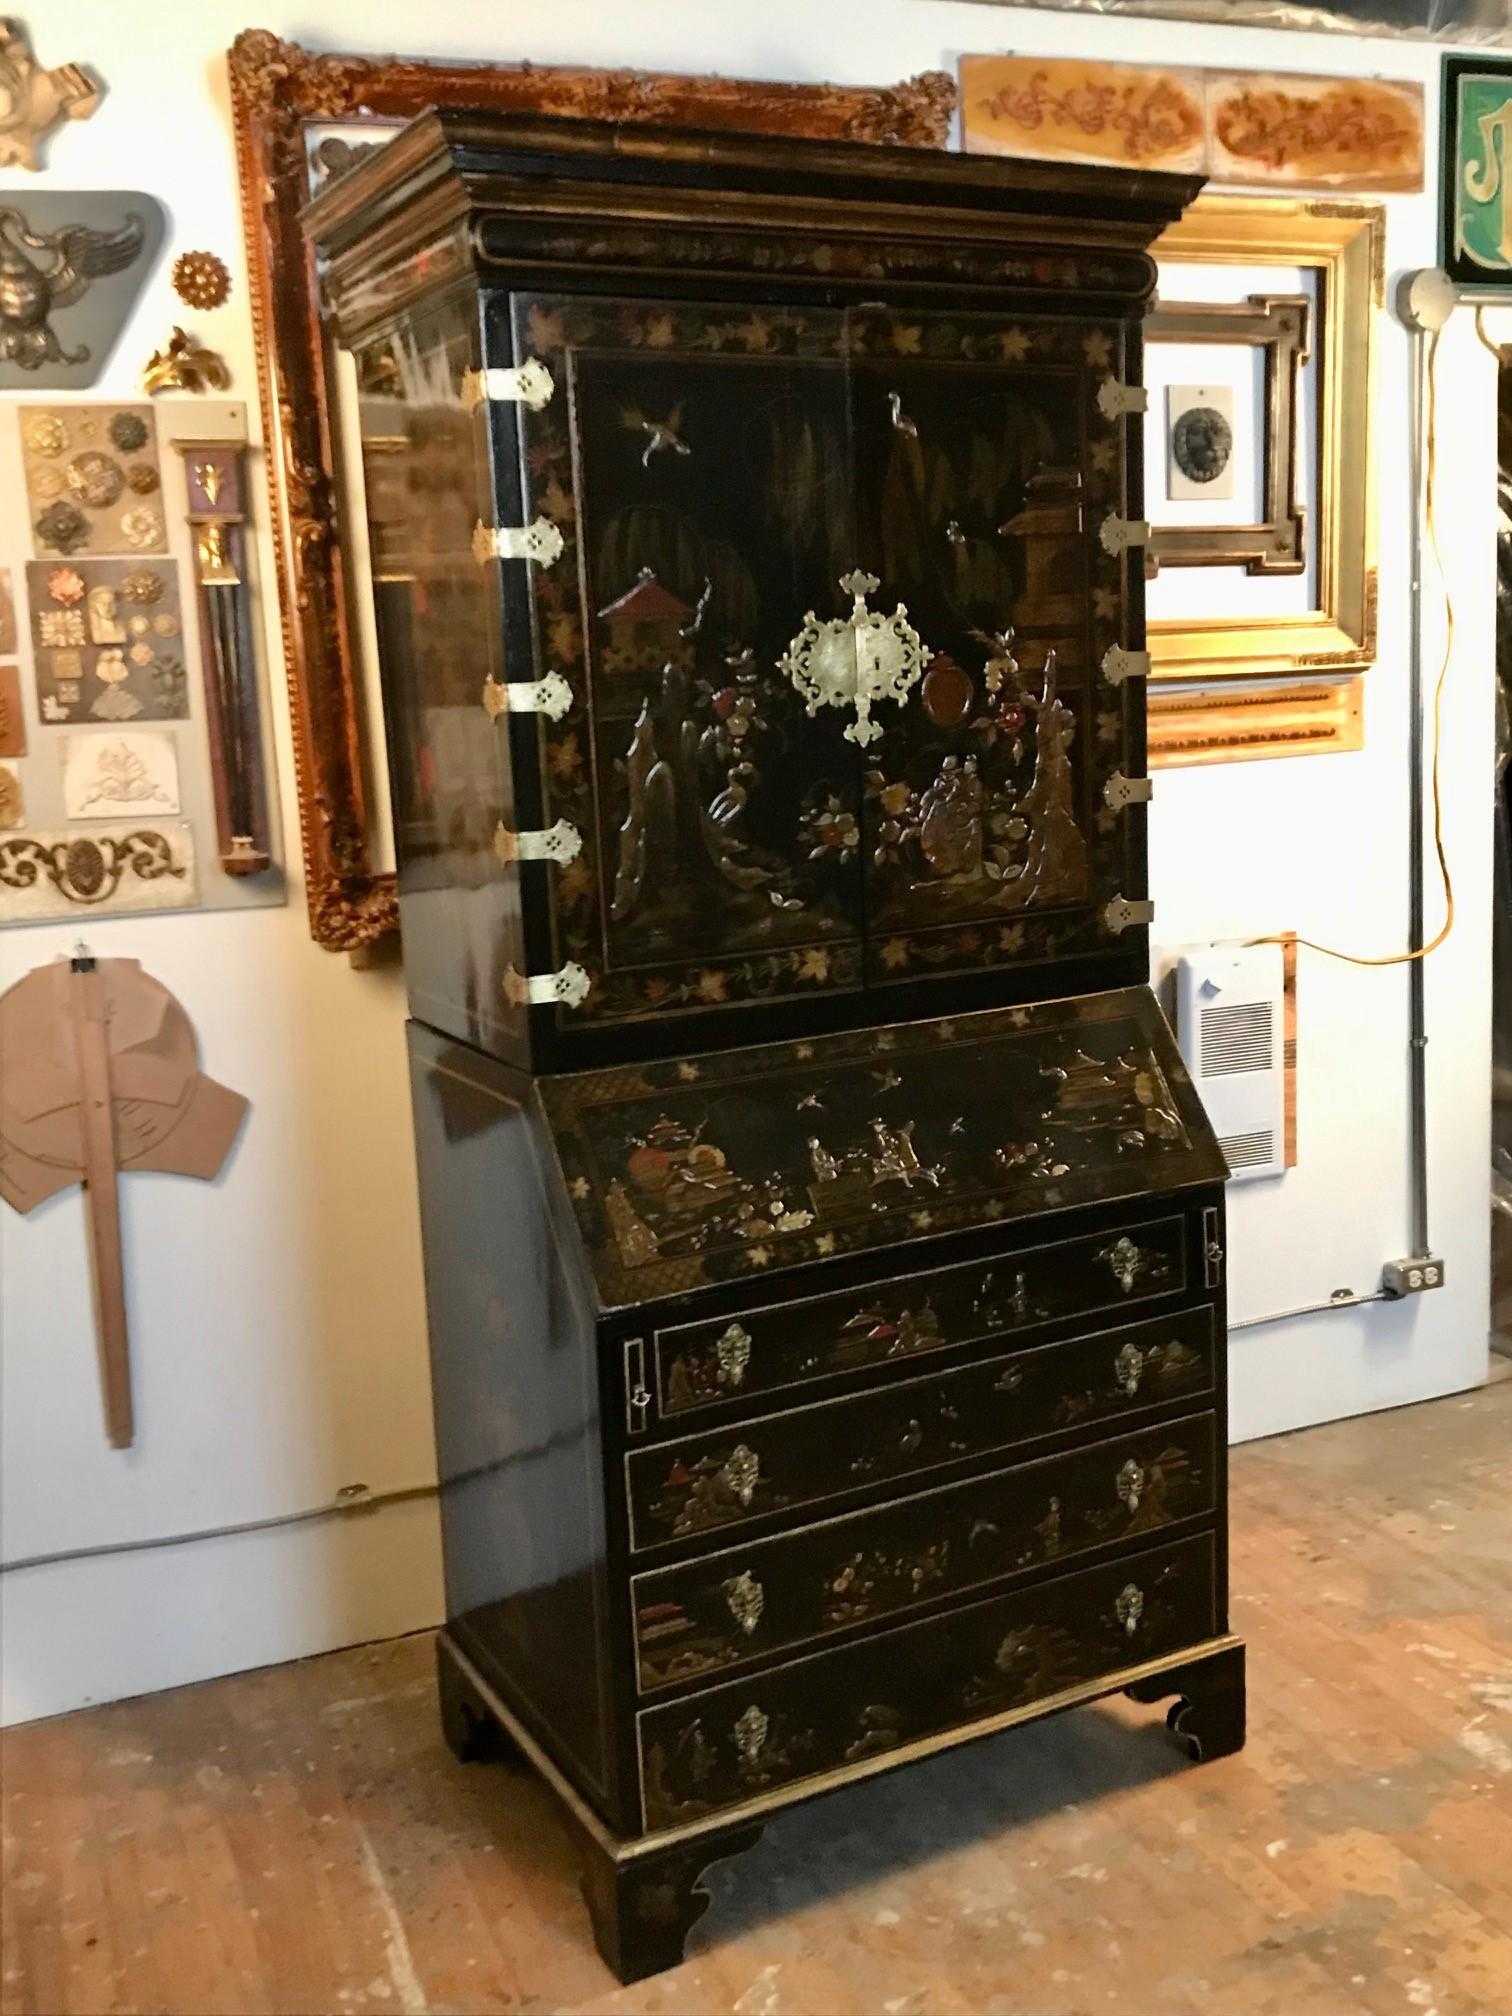 An 18th century English Chinoiserie Bureau Bookcase, profusely lacquered with exotic birds in a flowering landscape, pavilions and “oriental” figures on a black ground. The upper section is enclosed by a pair of doors, the lower has a fall front and